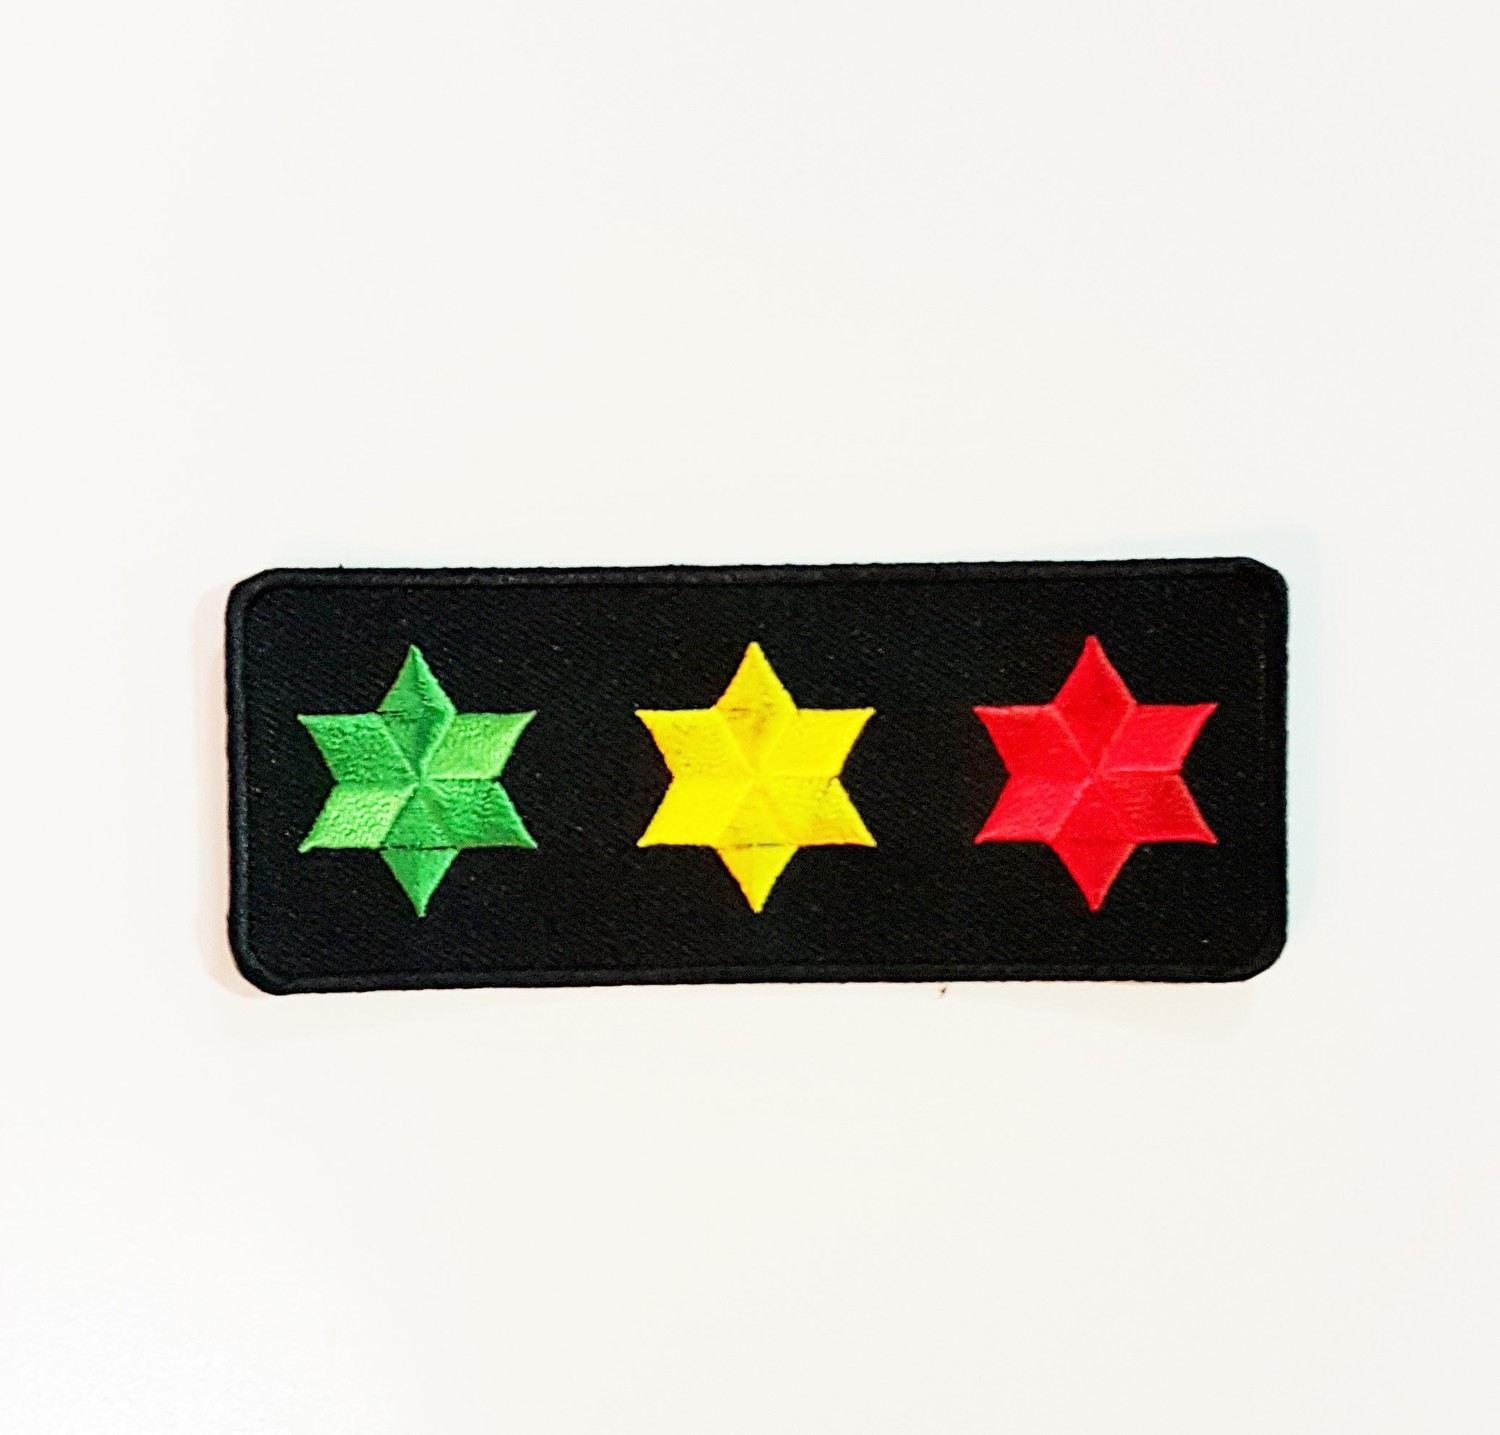 Small 3 Star Green, Yellow, and Red Patch